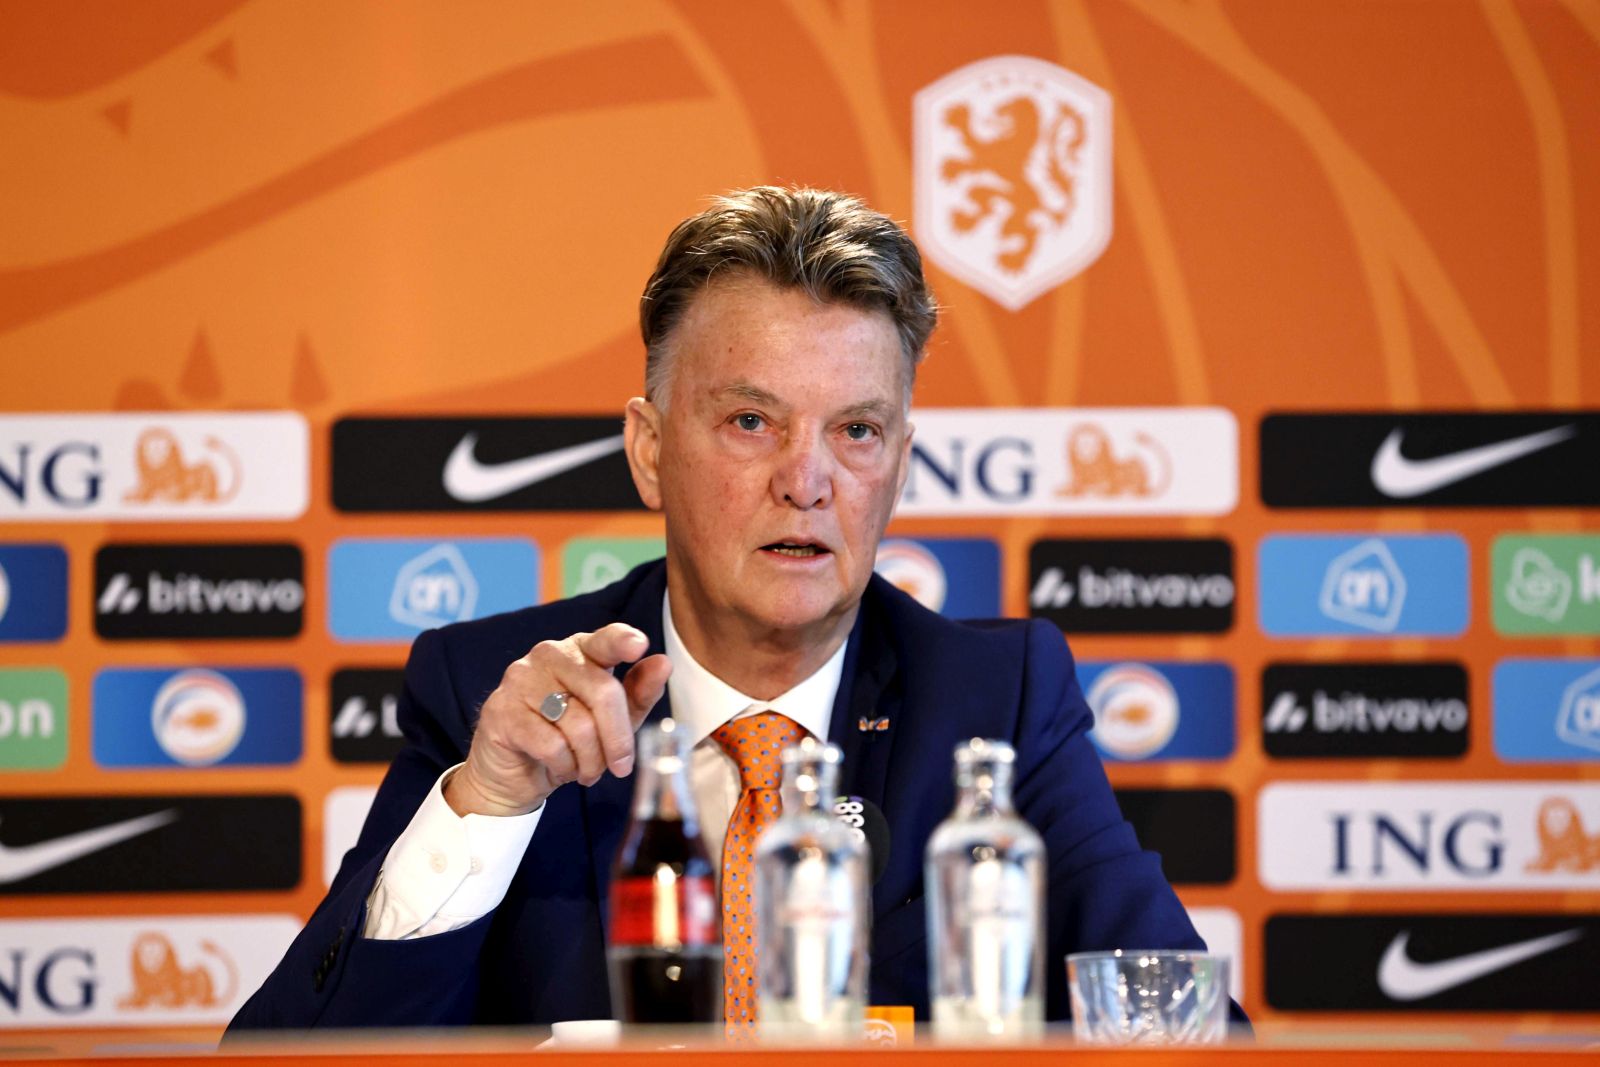 epa10299787 Head coach Louis van Gaal of the Dutch national soccer team attends a press conference in Zeist, Netherlands, 11 November 2022. He explained his selection for the upcoming 2022 FIFA World Cup in Qatar.  EPA/MAURICE VAN STEEN